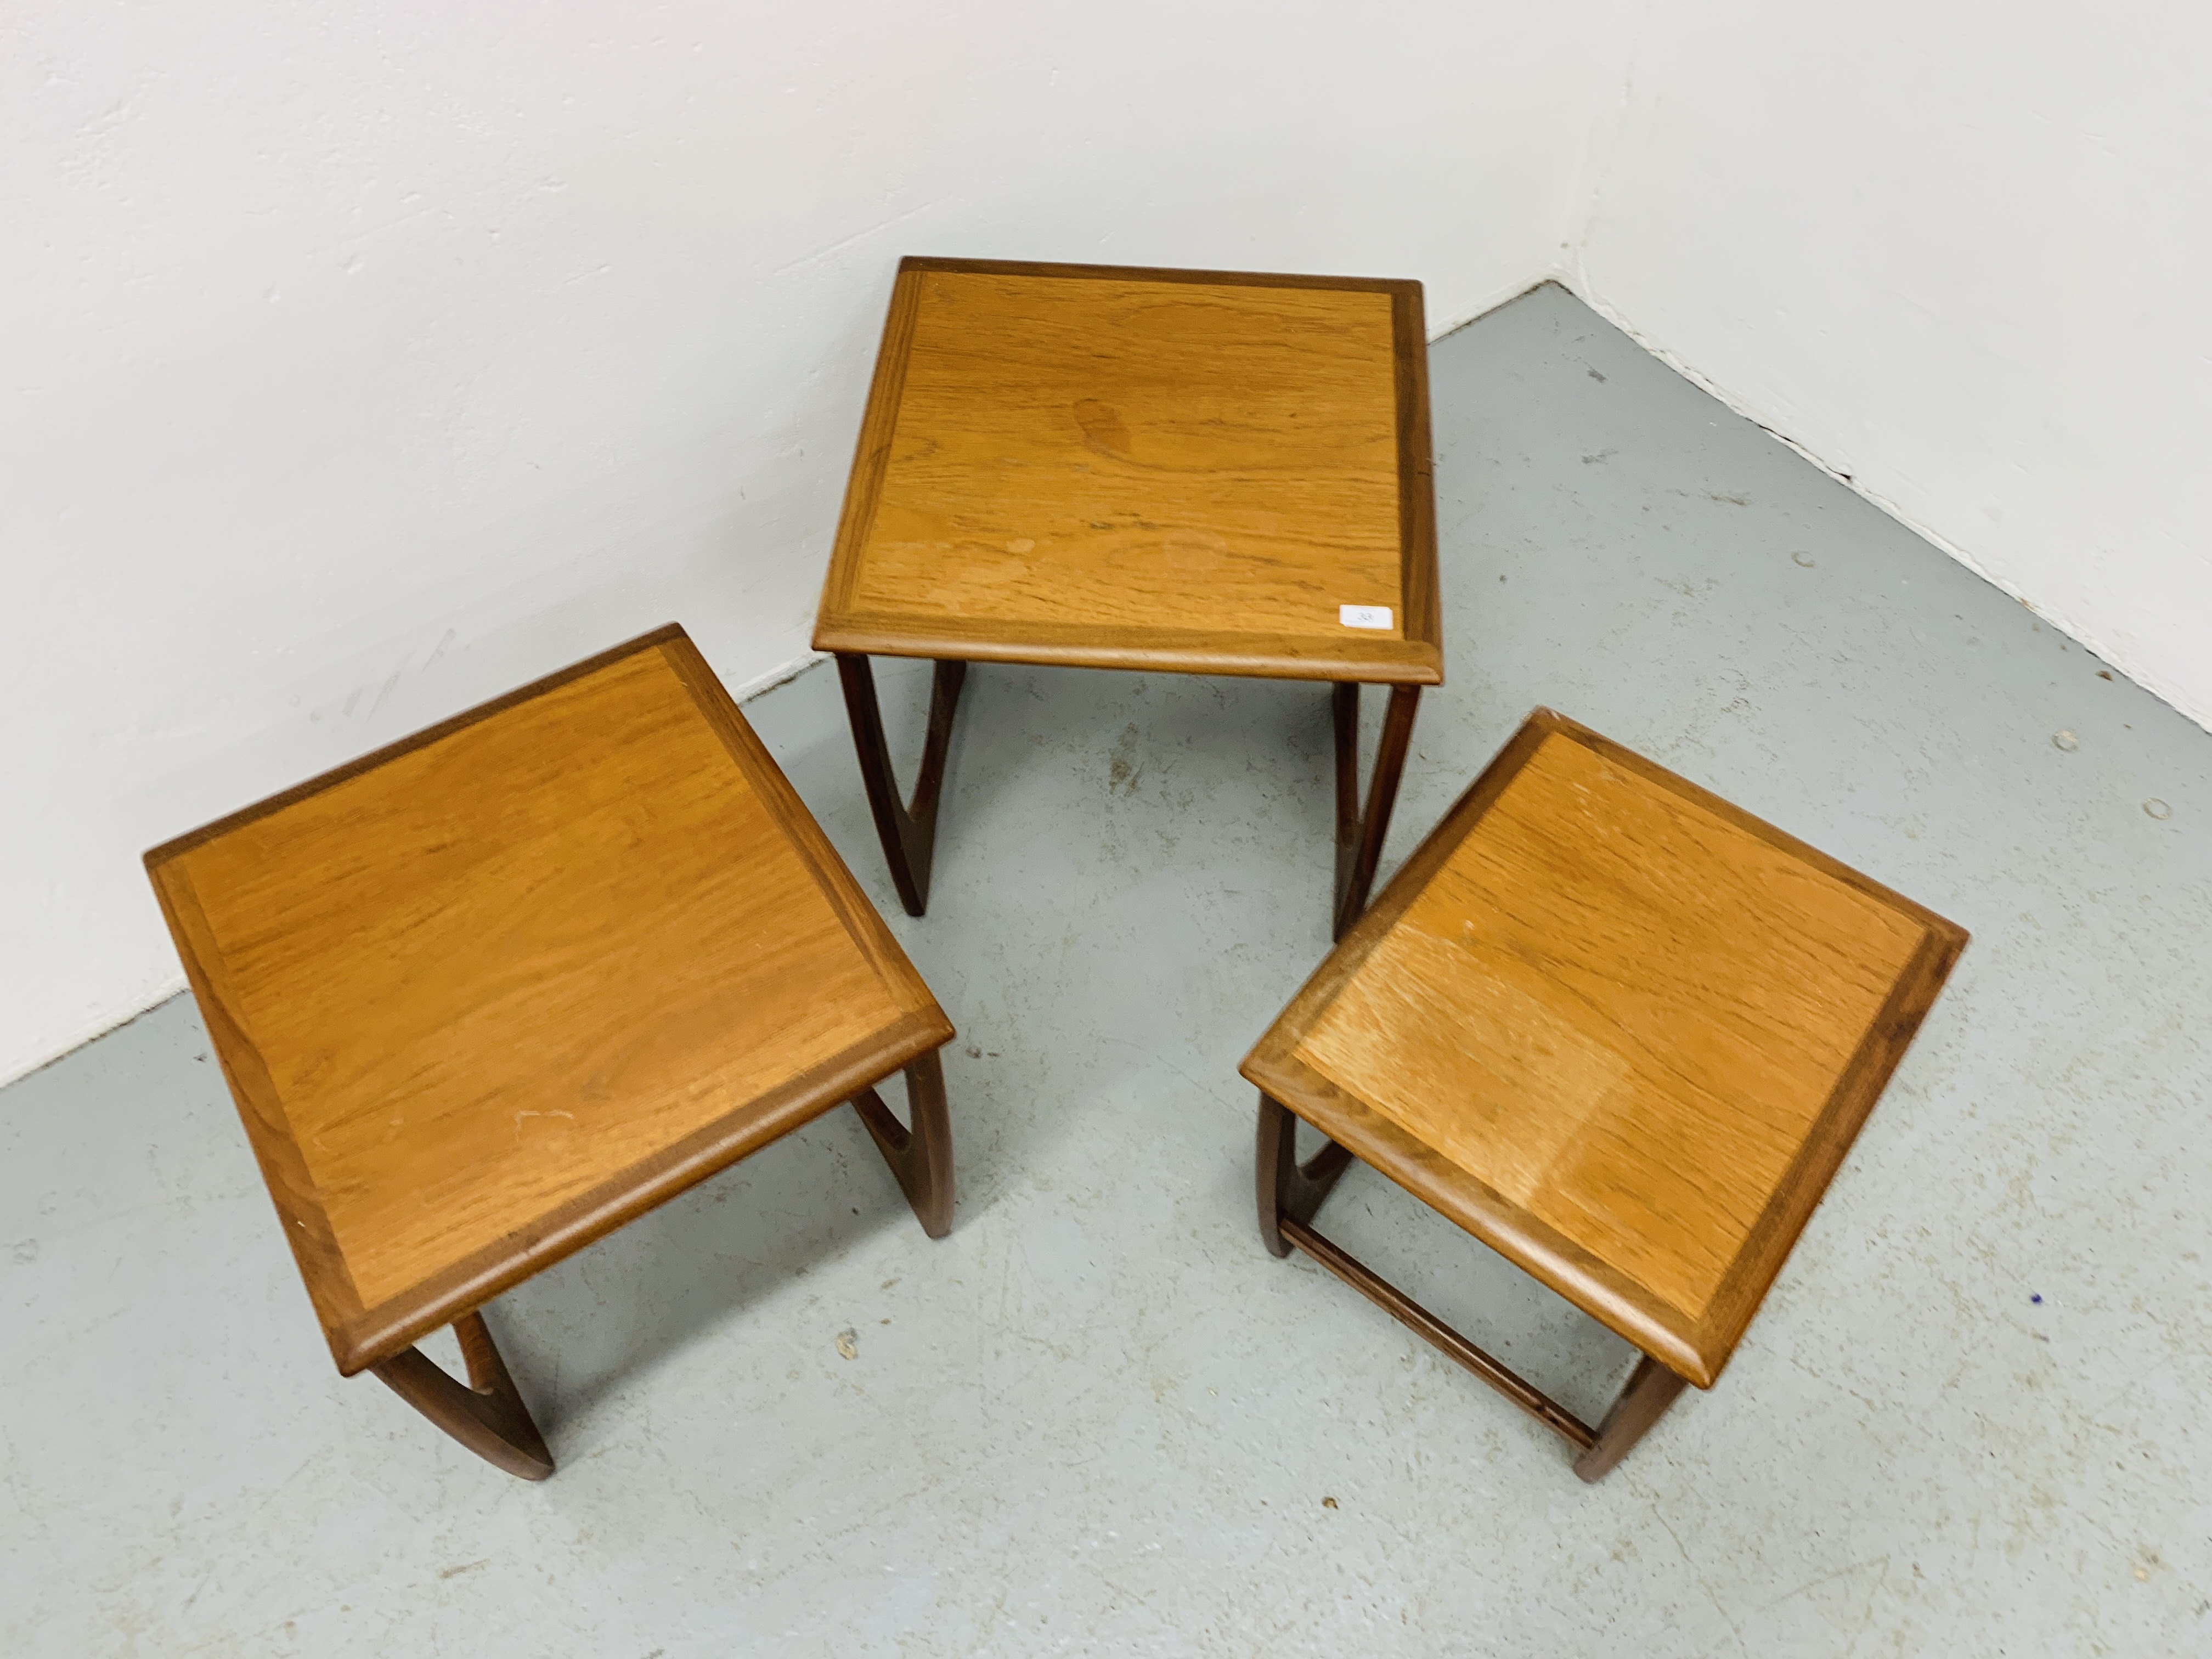 A G PLAN TEAK RETRO STYLE GRADUATED SET OF THREE OCCASIONAL TABLES - Image 2 of 6